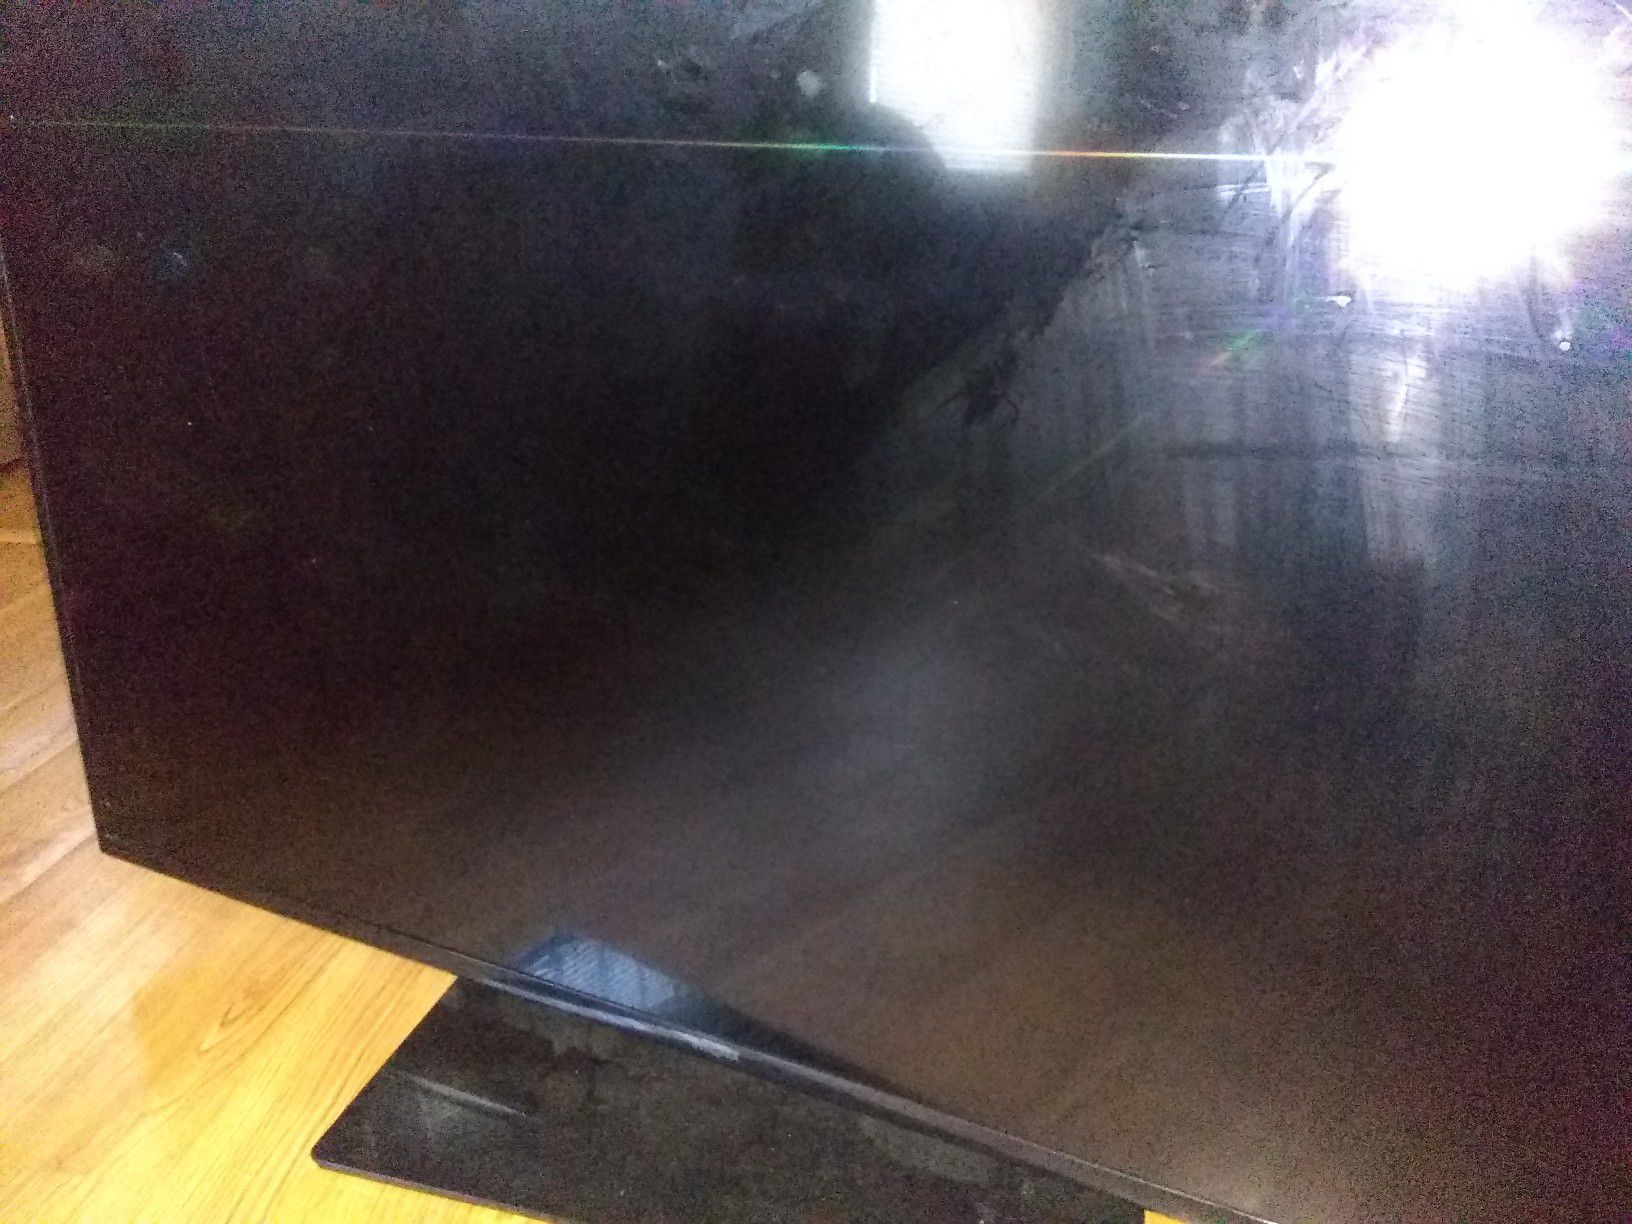 55" INSIGNIA TV, not working $35